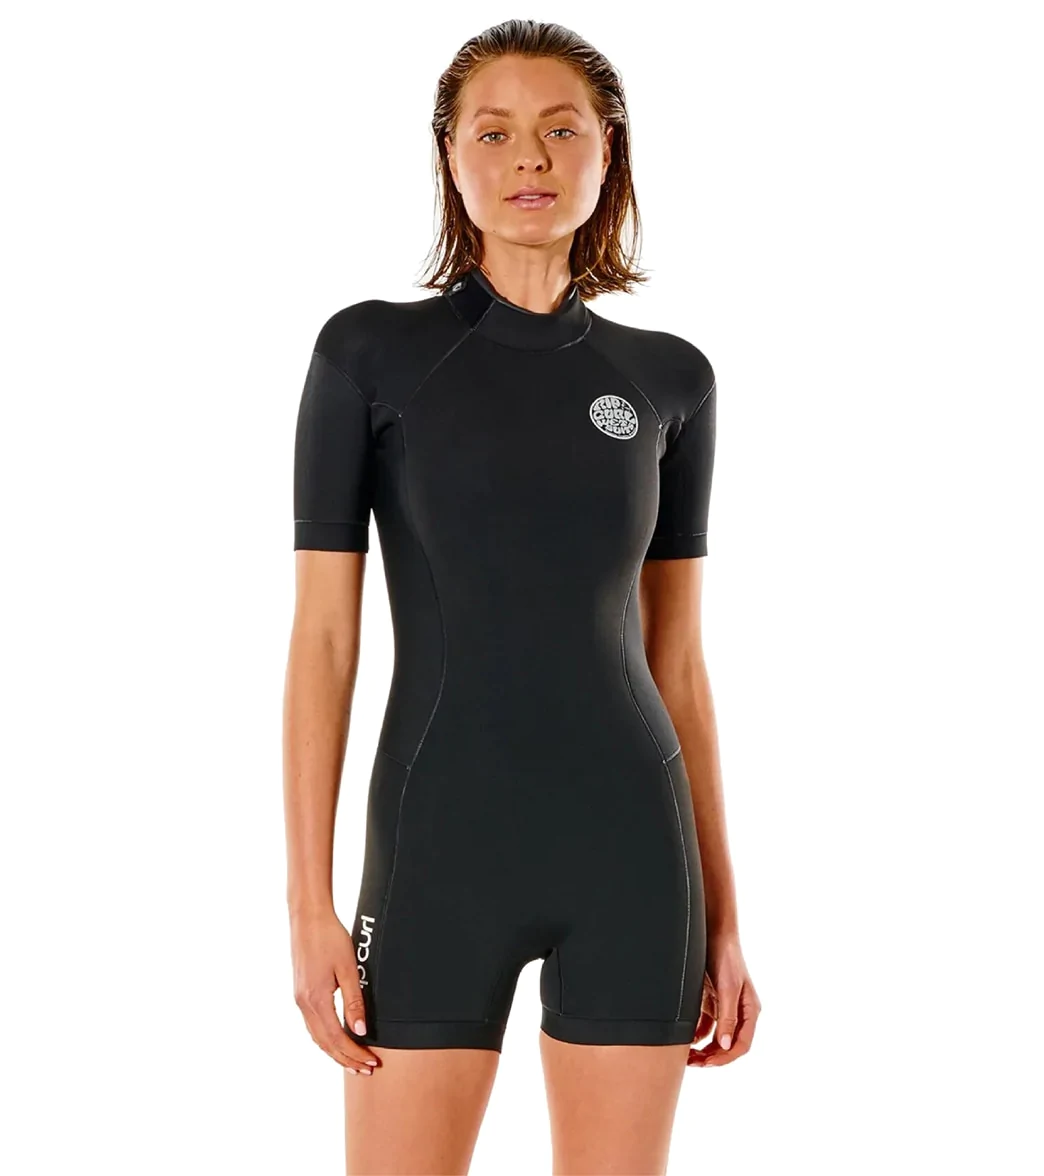 SwimOutlet Review